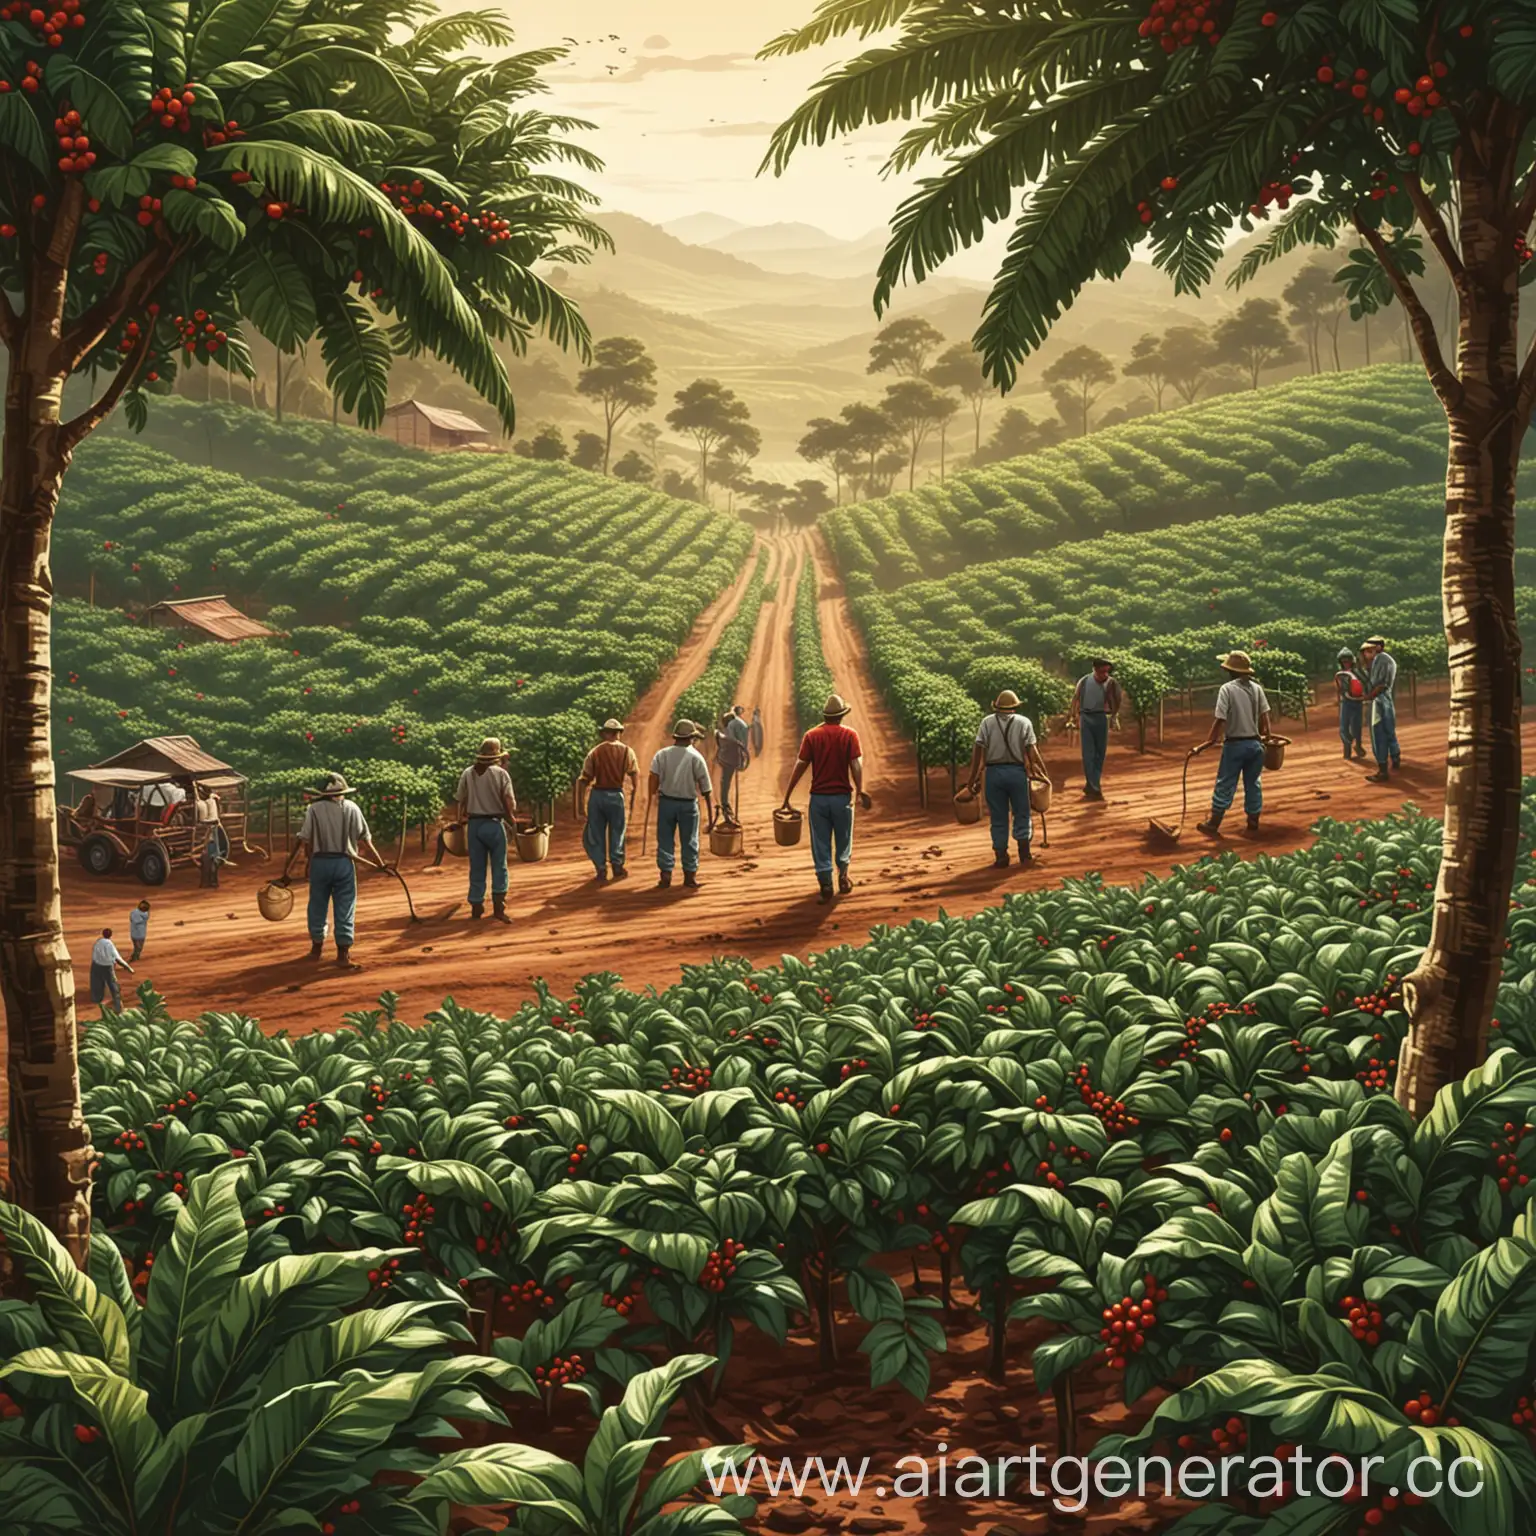 coffee farm, workers, vector style, hight resolution

